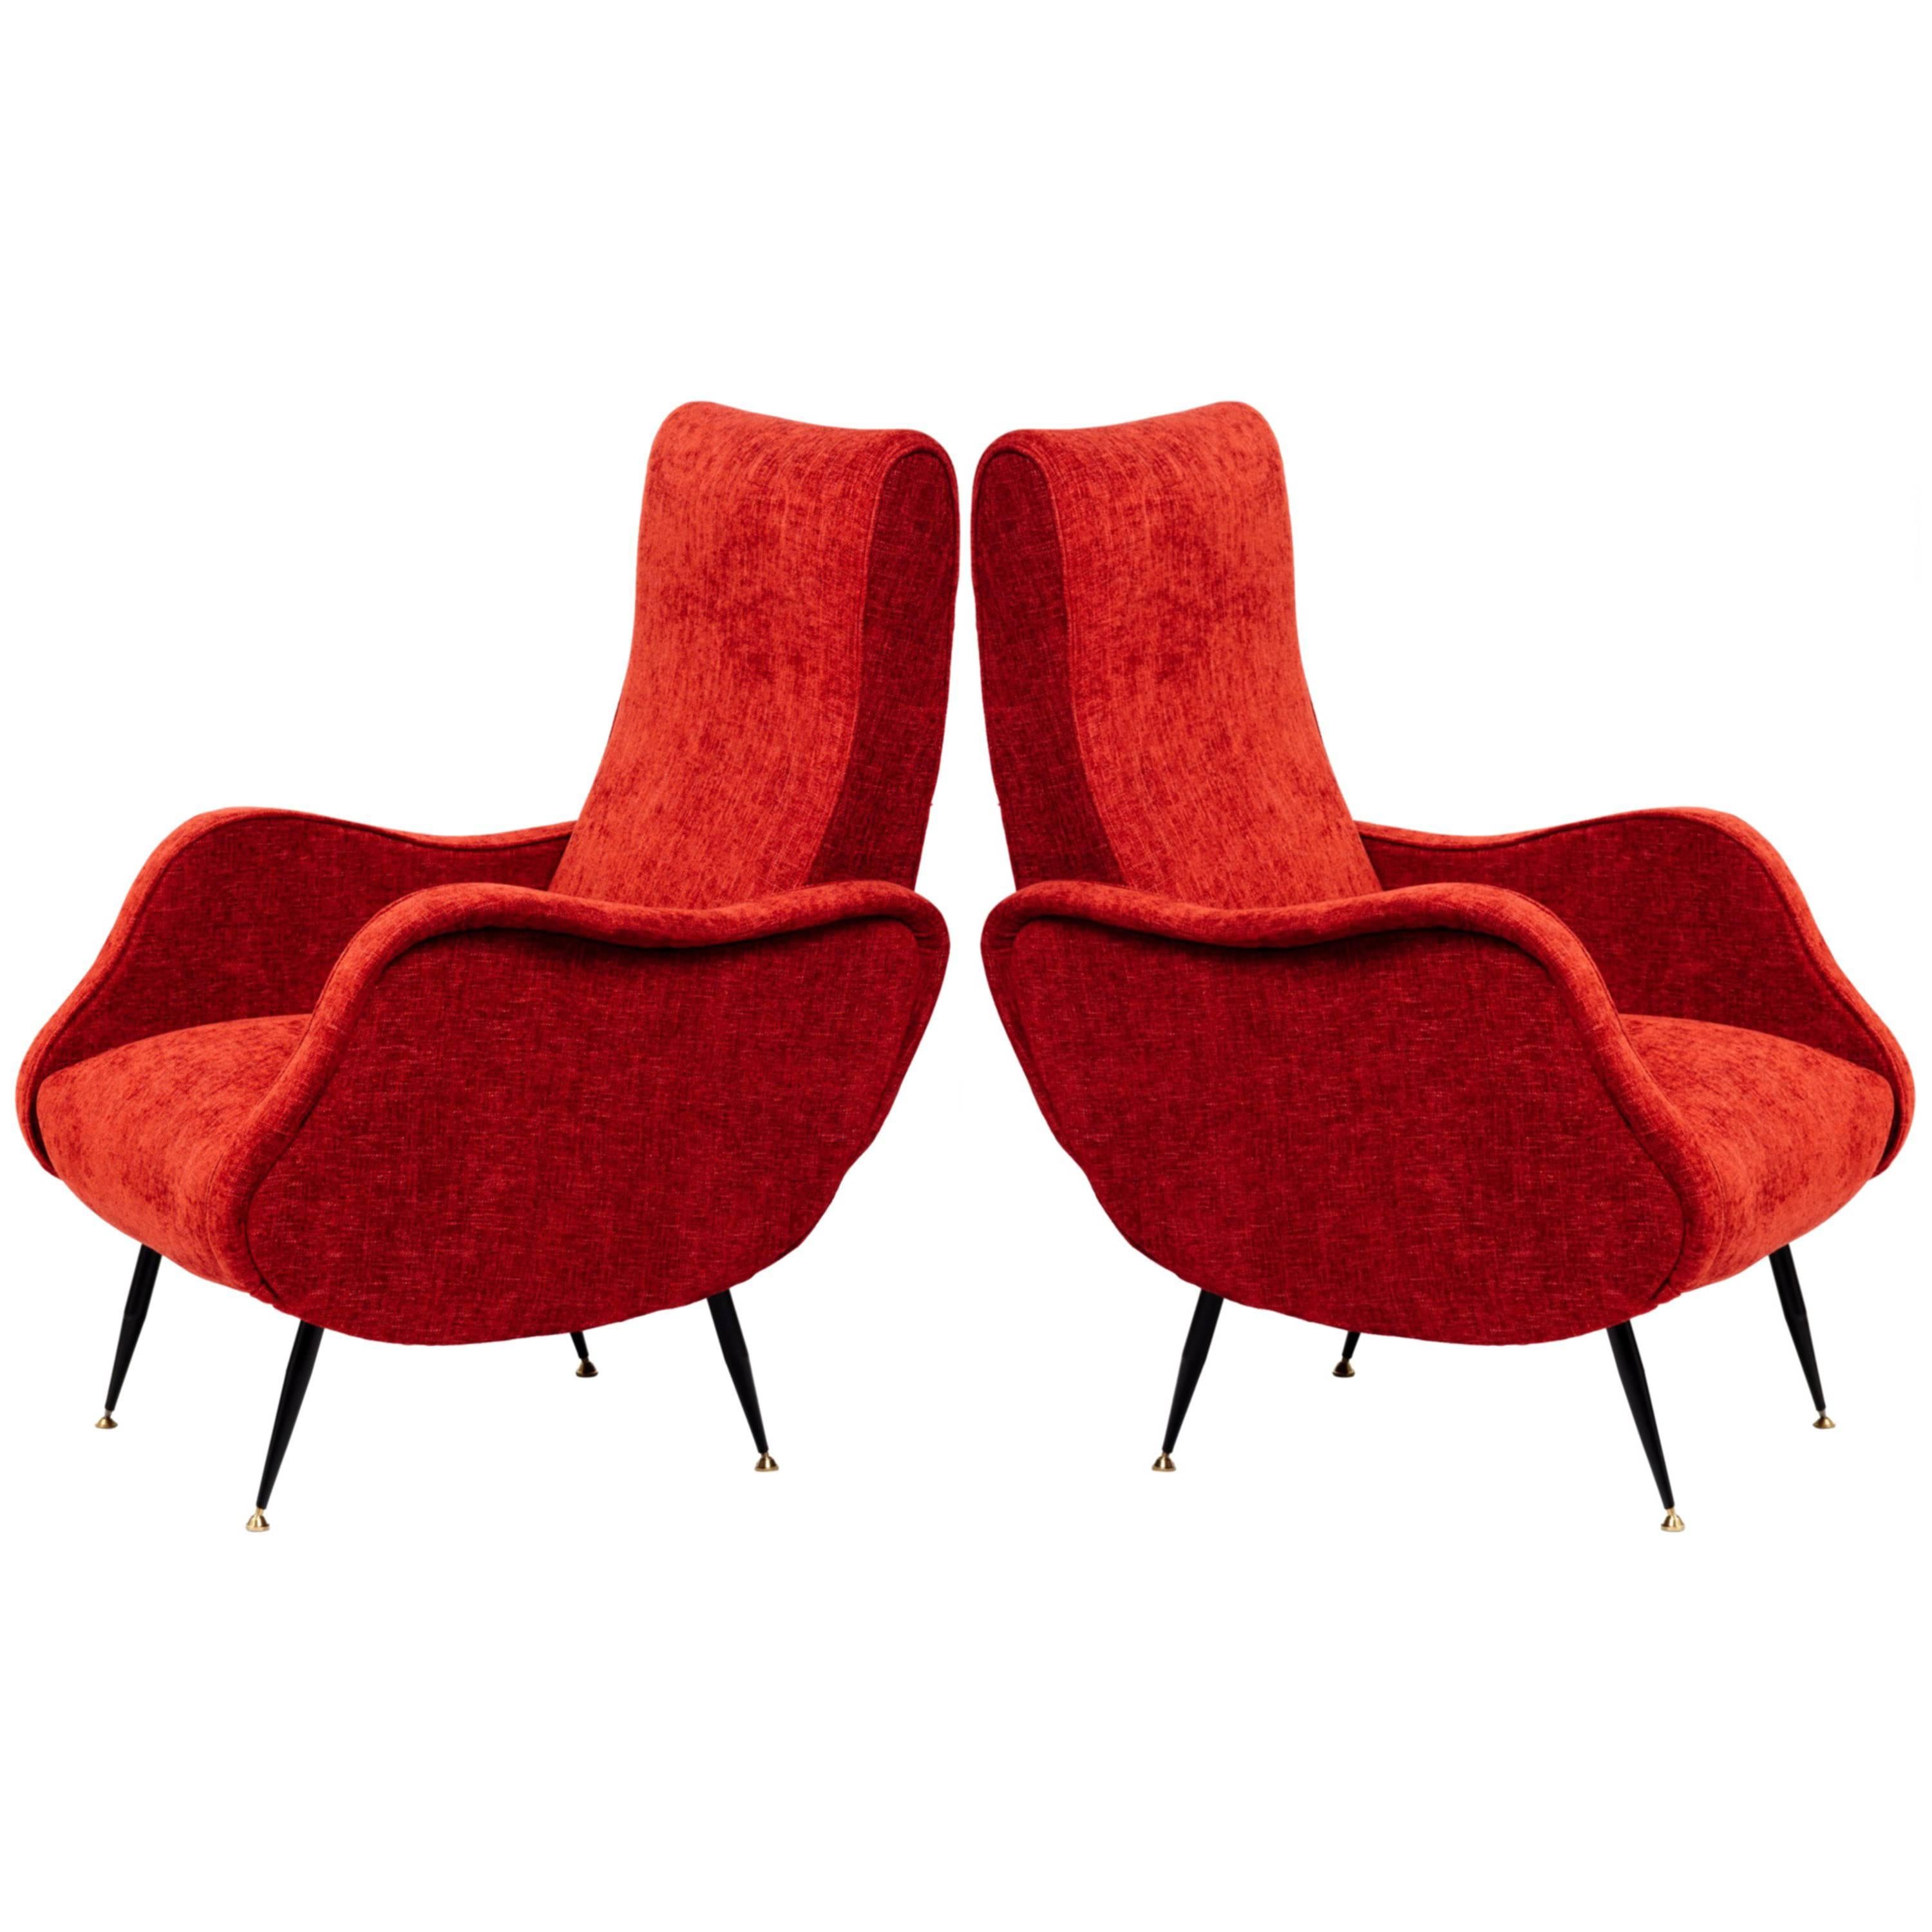 Italian Mid-Century Modern Lounge Chair in Vibrant Woven Red 1